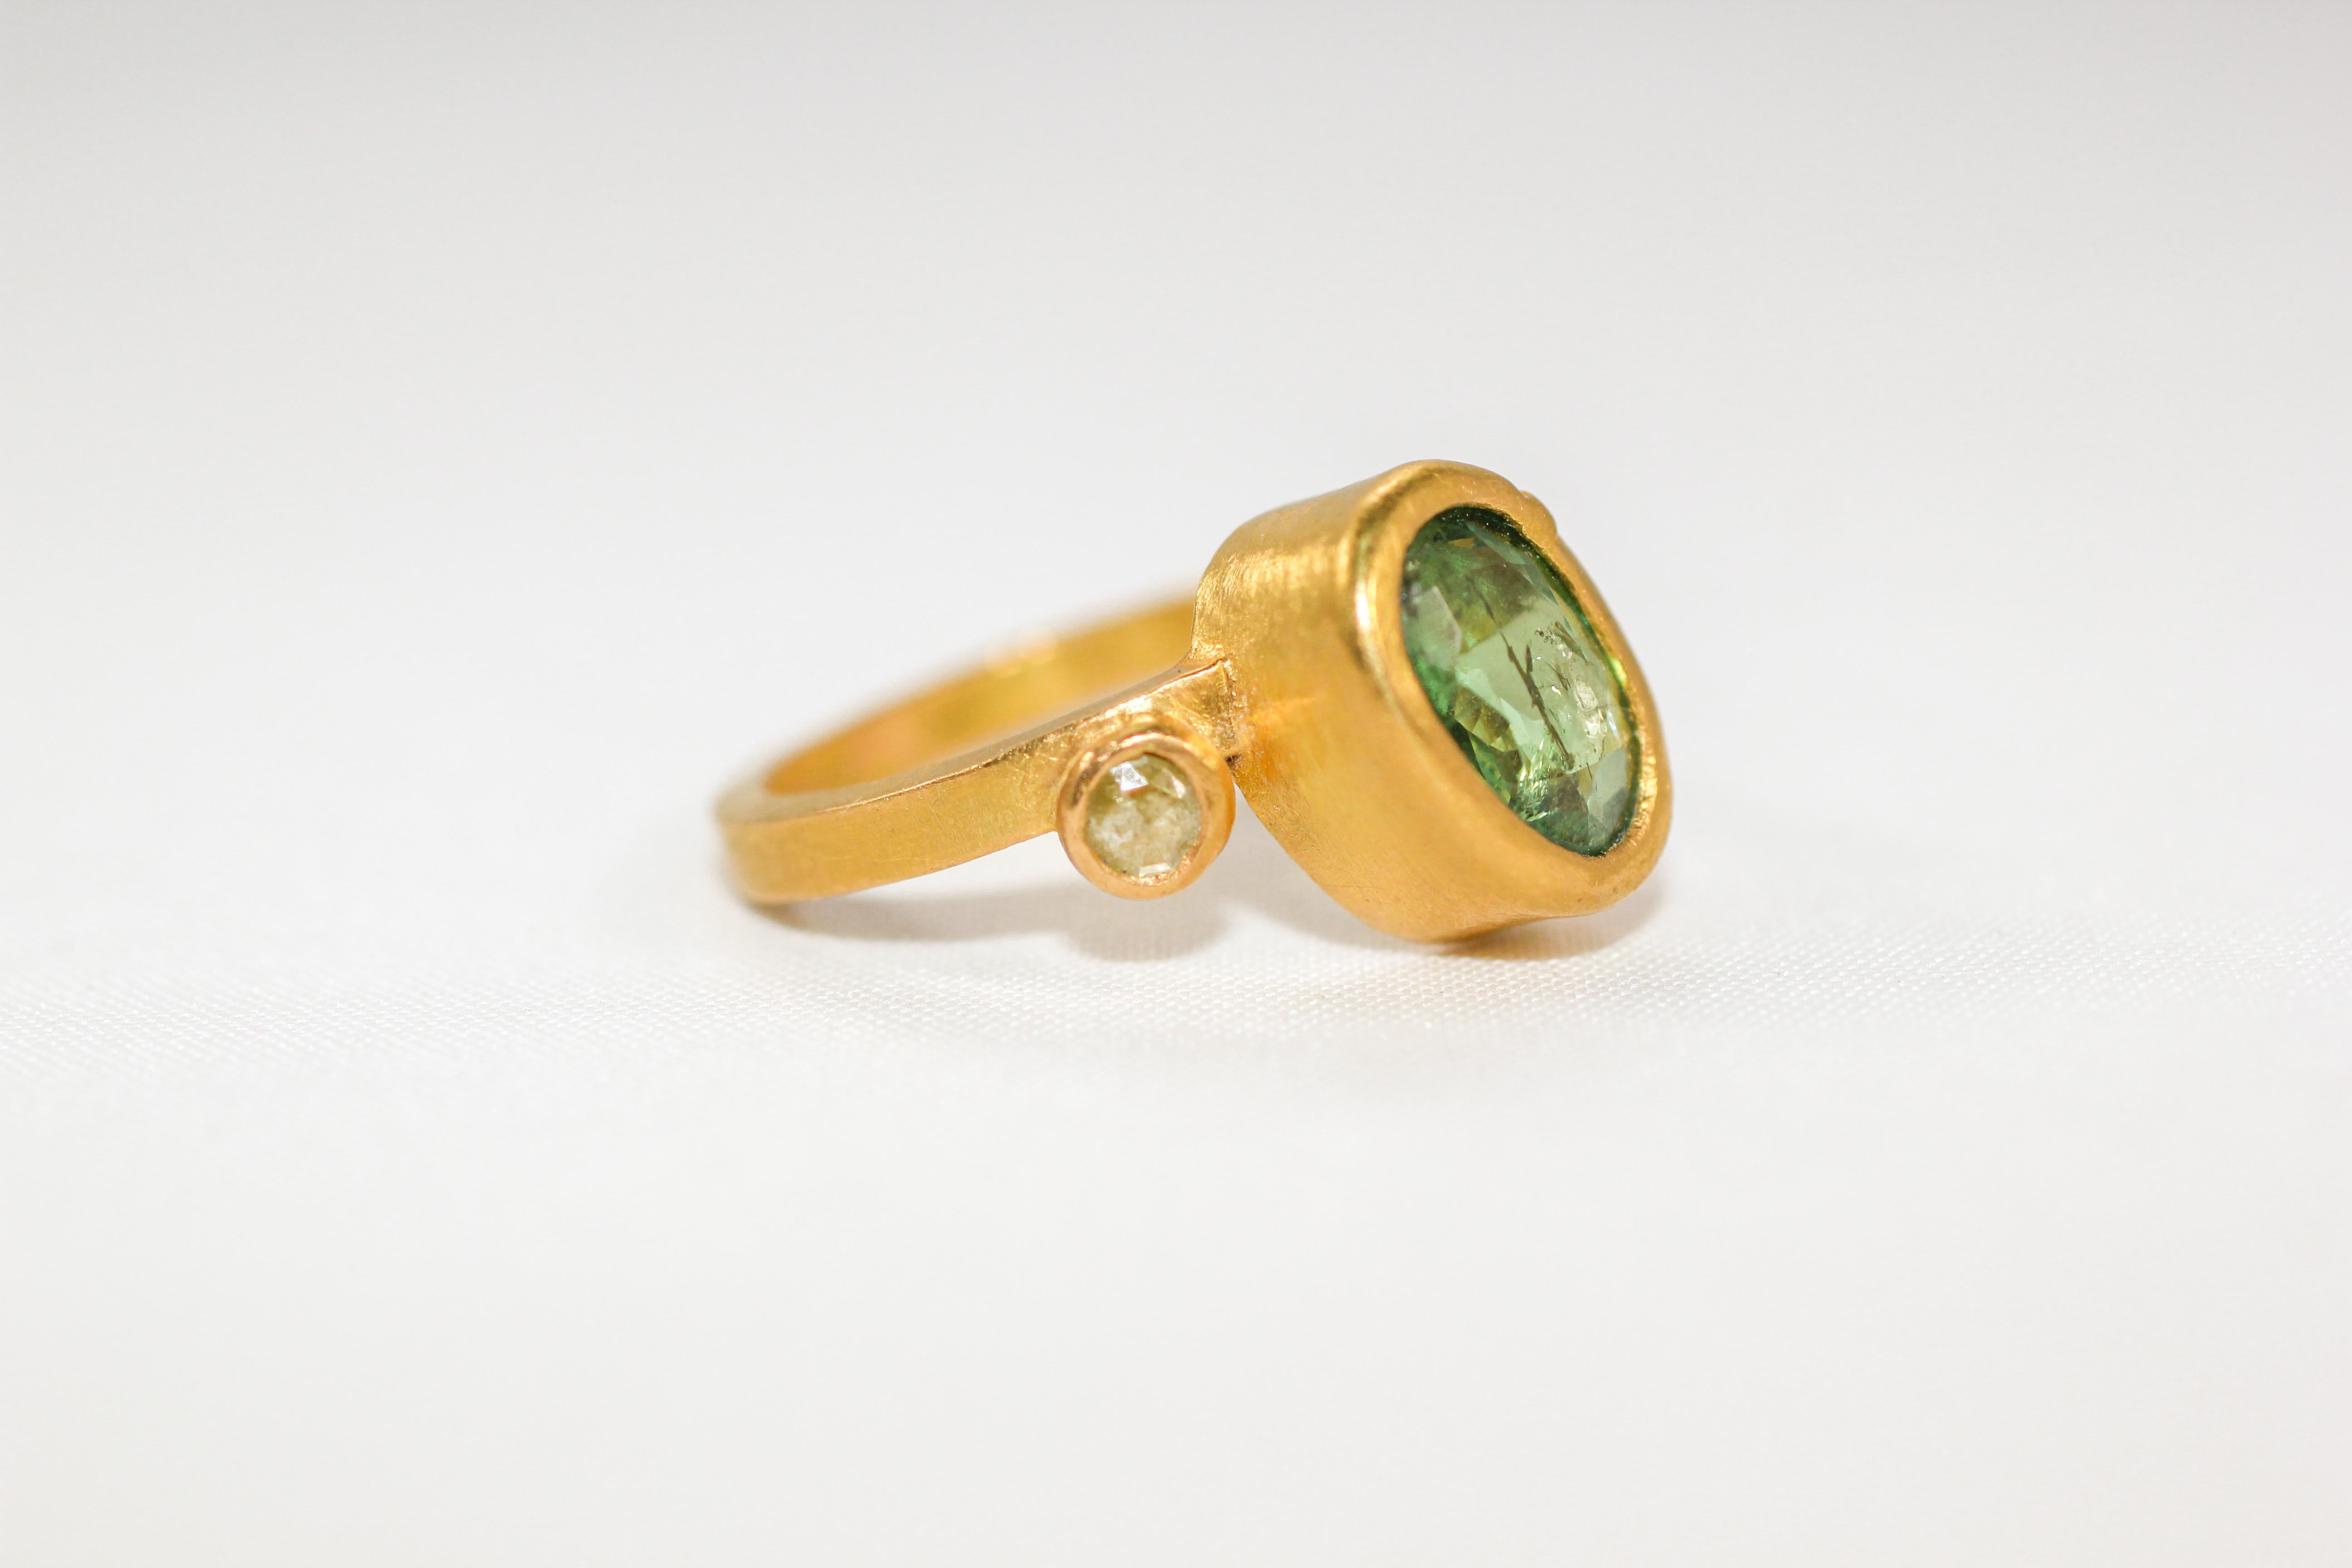 Our Popcorn Garnet Ring delivers a rich pop of green color. Whimsical bridal or stackable fashion three-stone ring in recycled 22k textured gold, featuring green Russian demantoid garnet flanked on both sides by two yellow rose cut diamonds. The